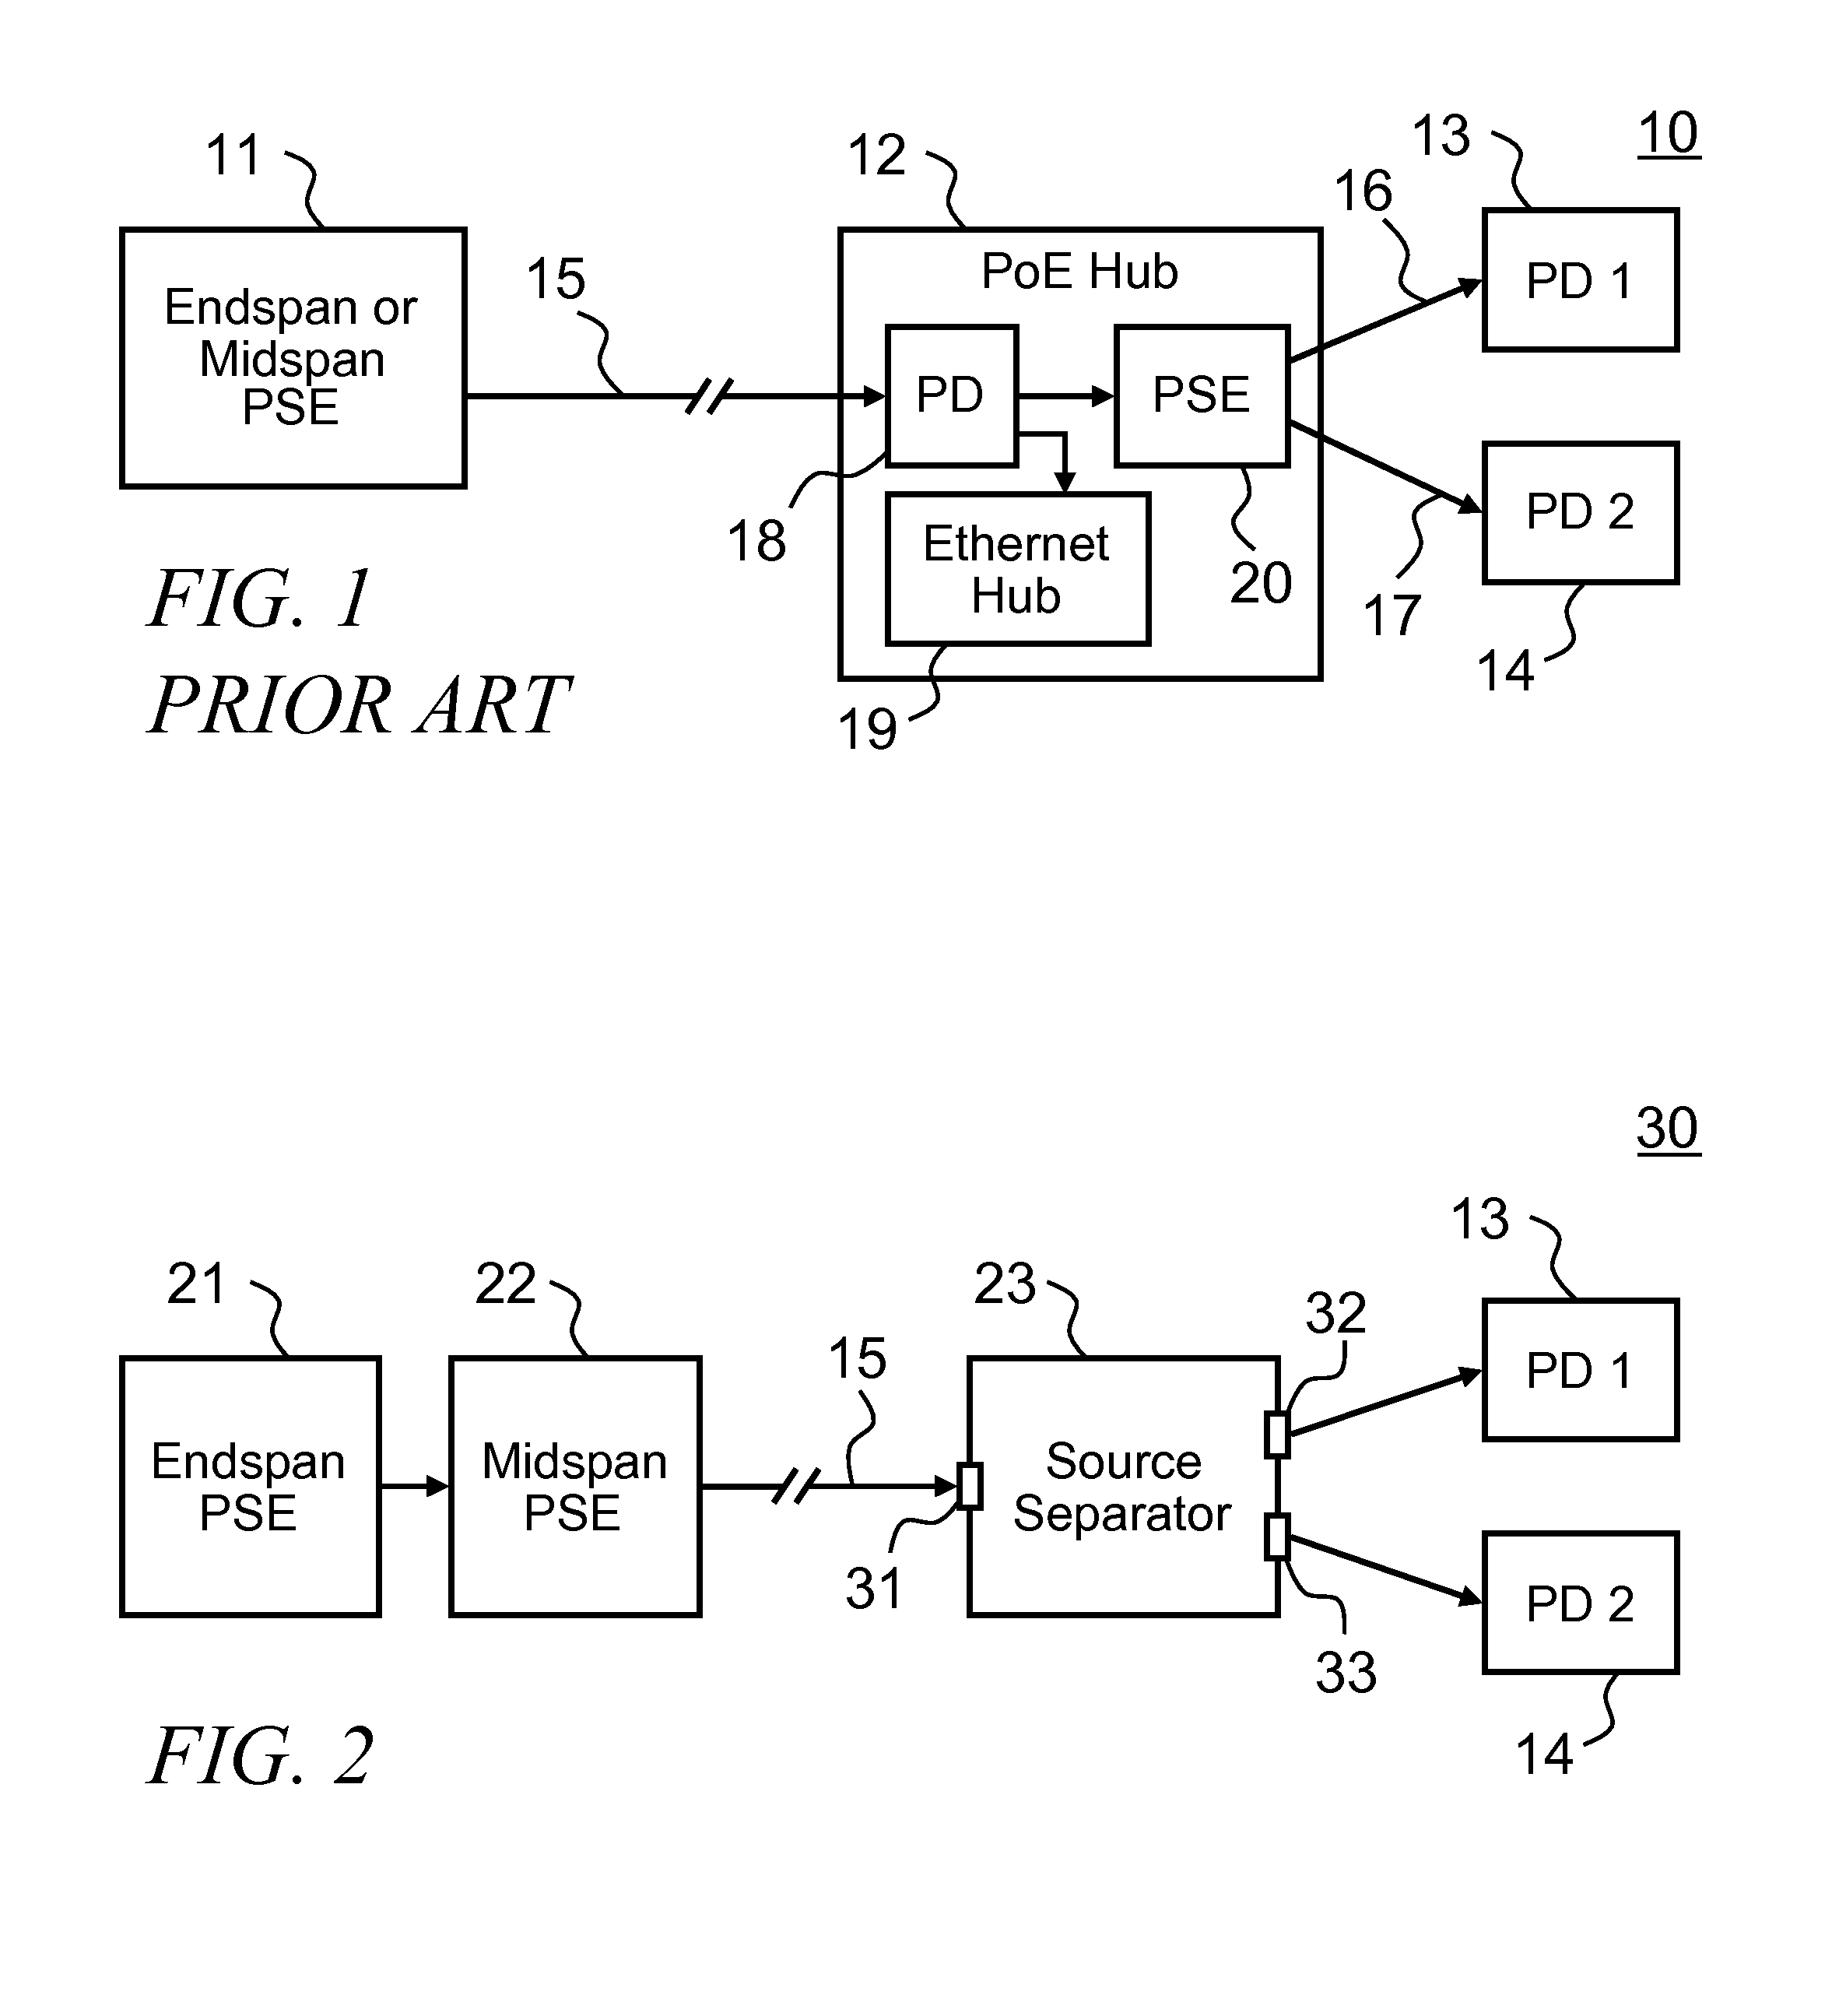 Source Separator for Power over Ethernet Systems